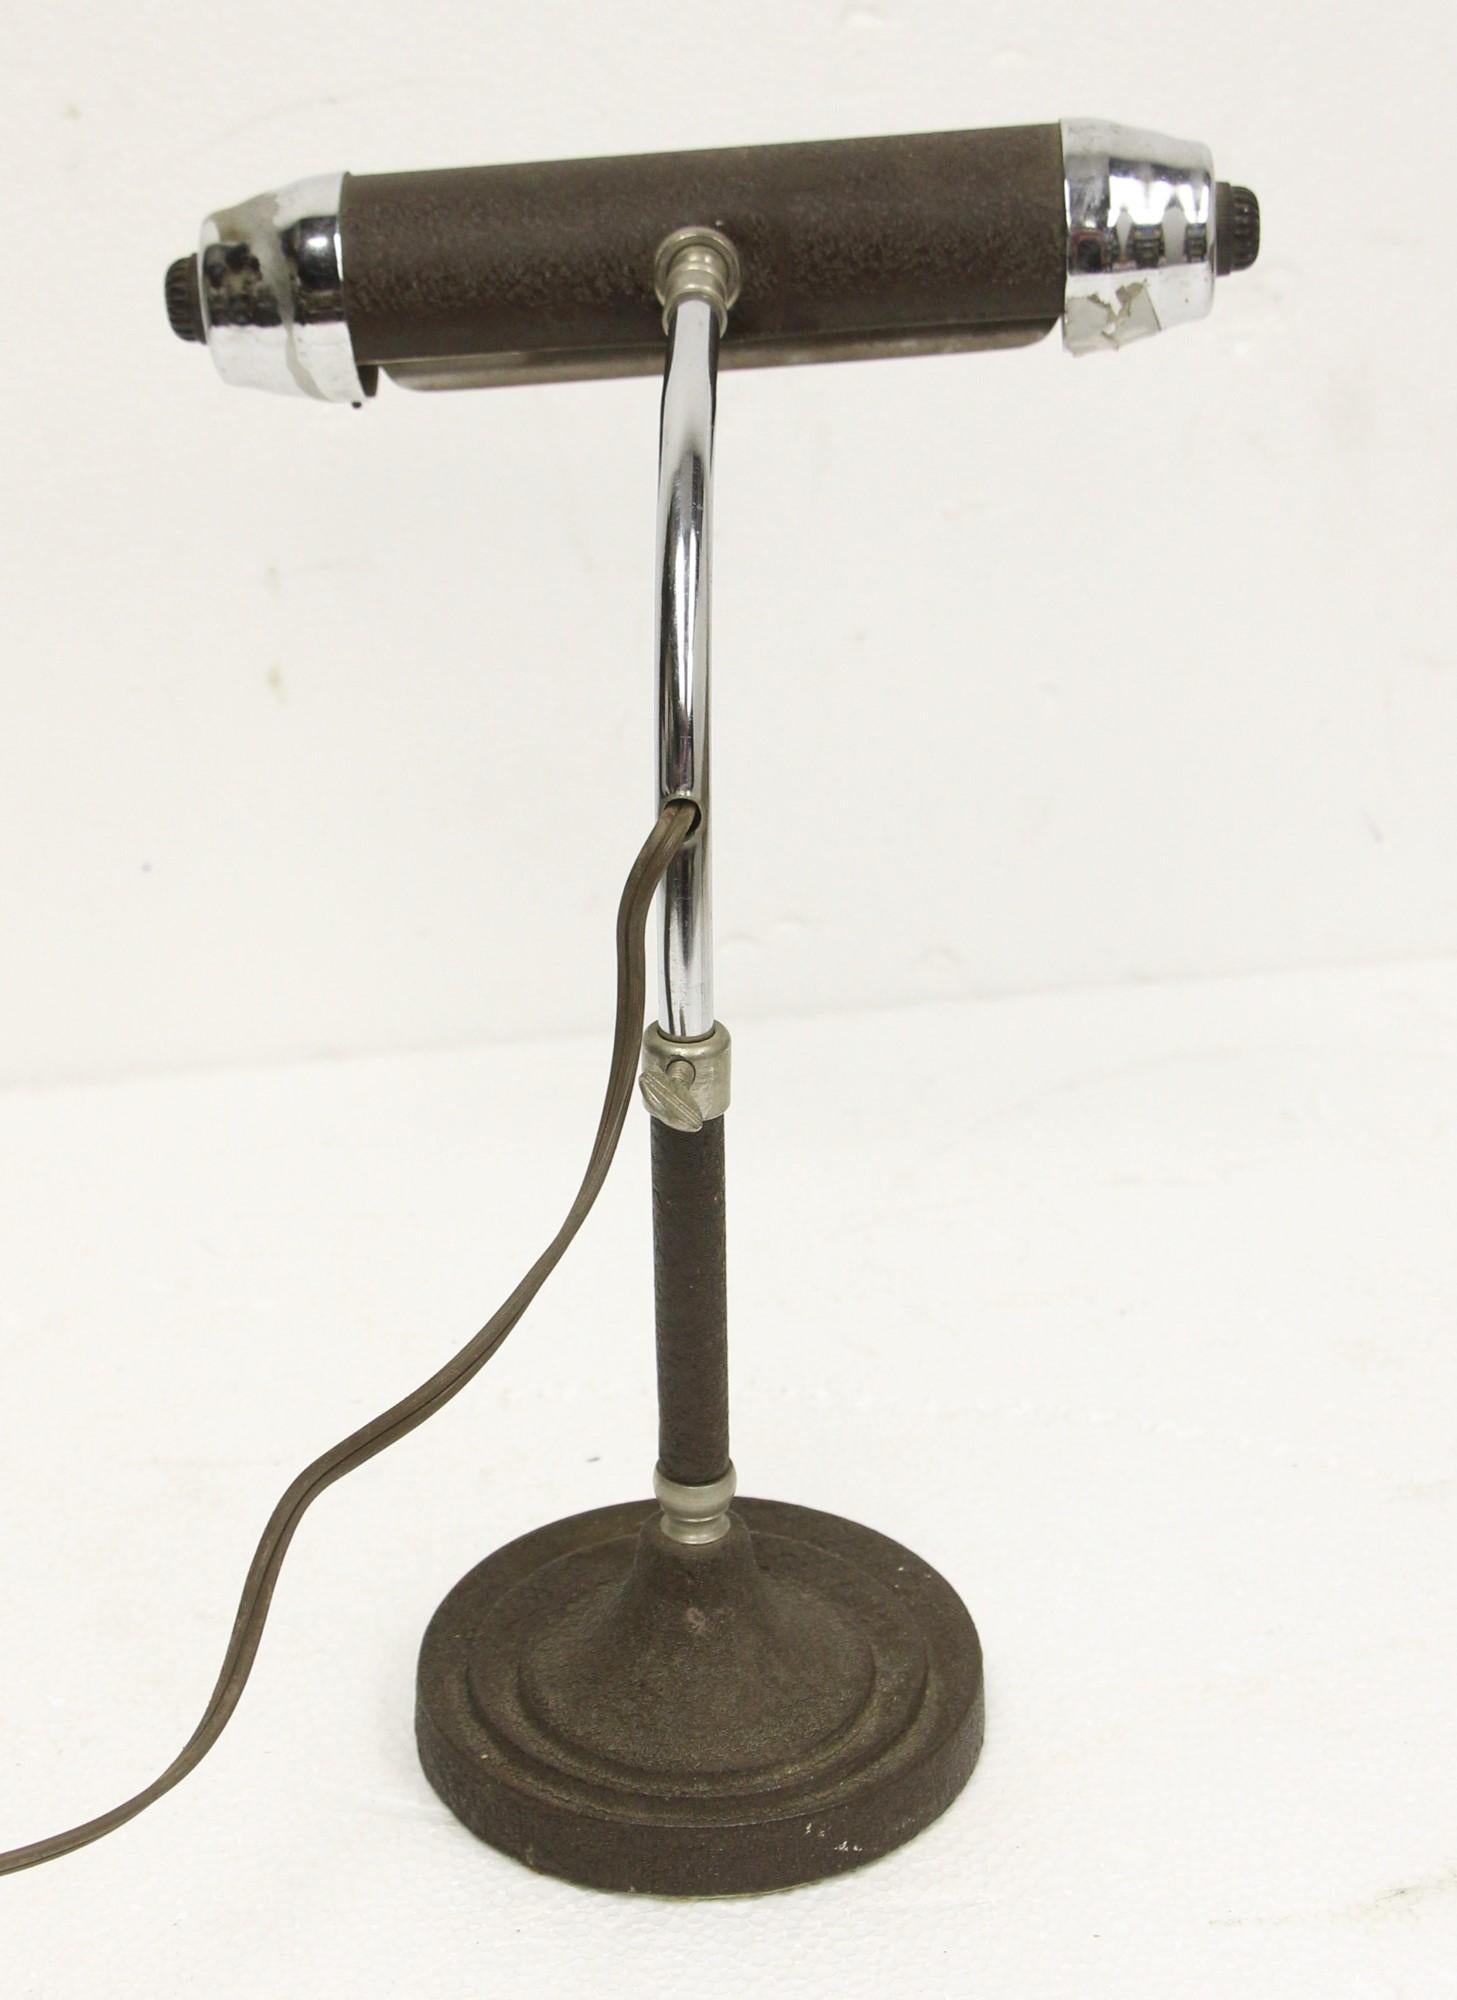 Art Deco 1950s Adjustable Piano Bankers Desk Lamp in Textured Enamel and Chrome Vintage